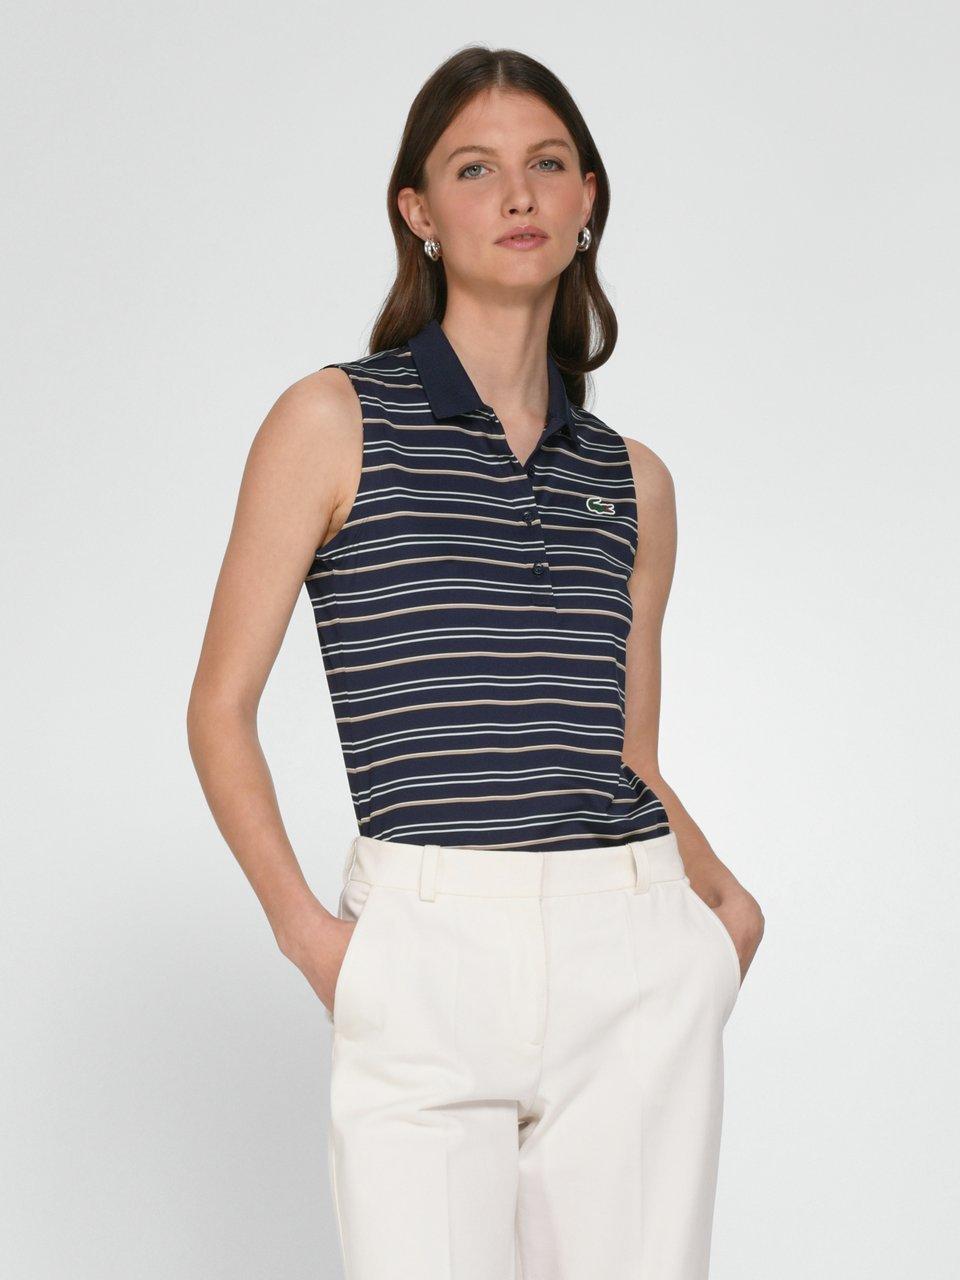 mord Let Flagermus Lacoste Women Polo shirts | peterhahn.co.uk